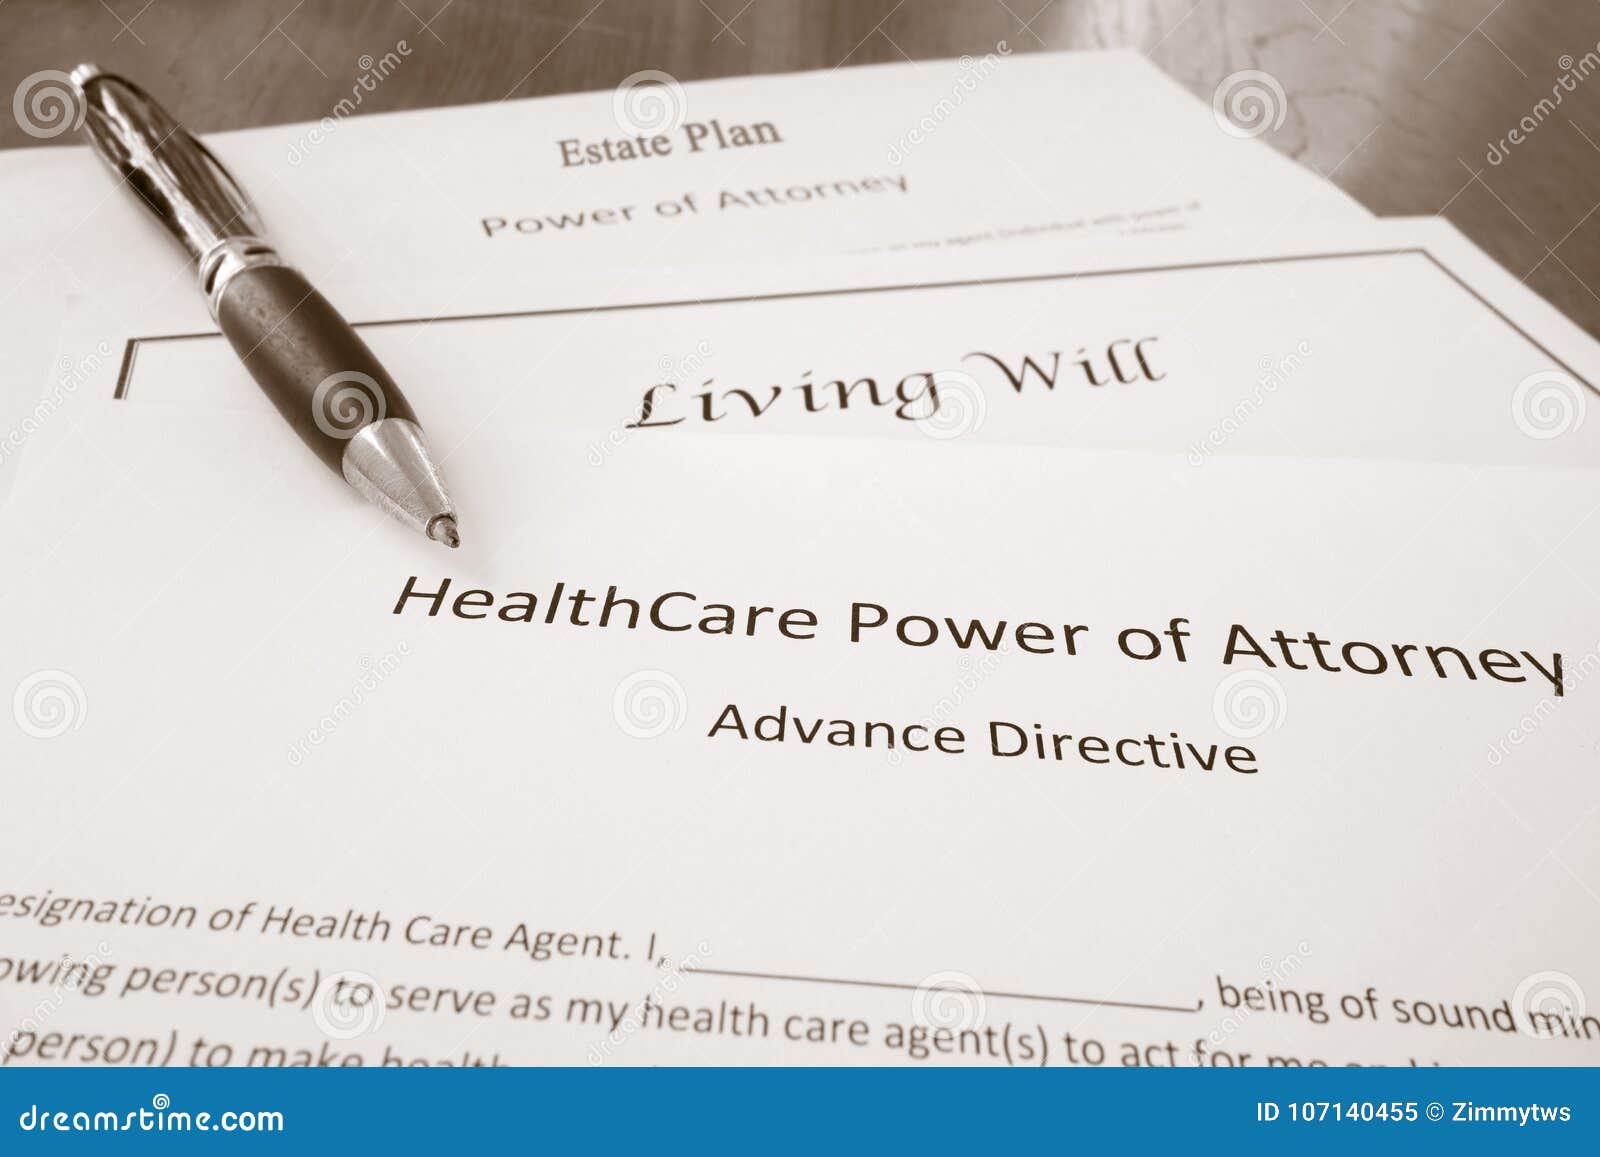 power of attorney, estate plan and living will